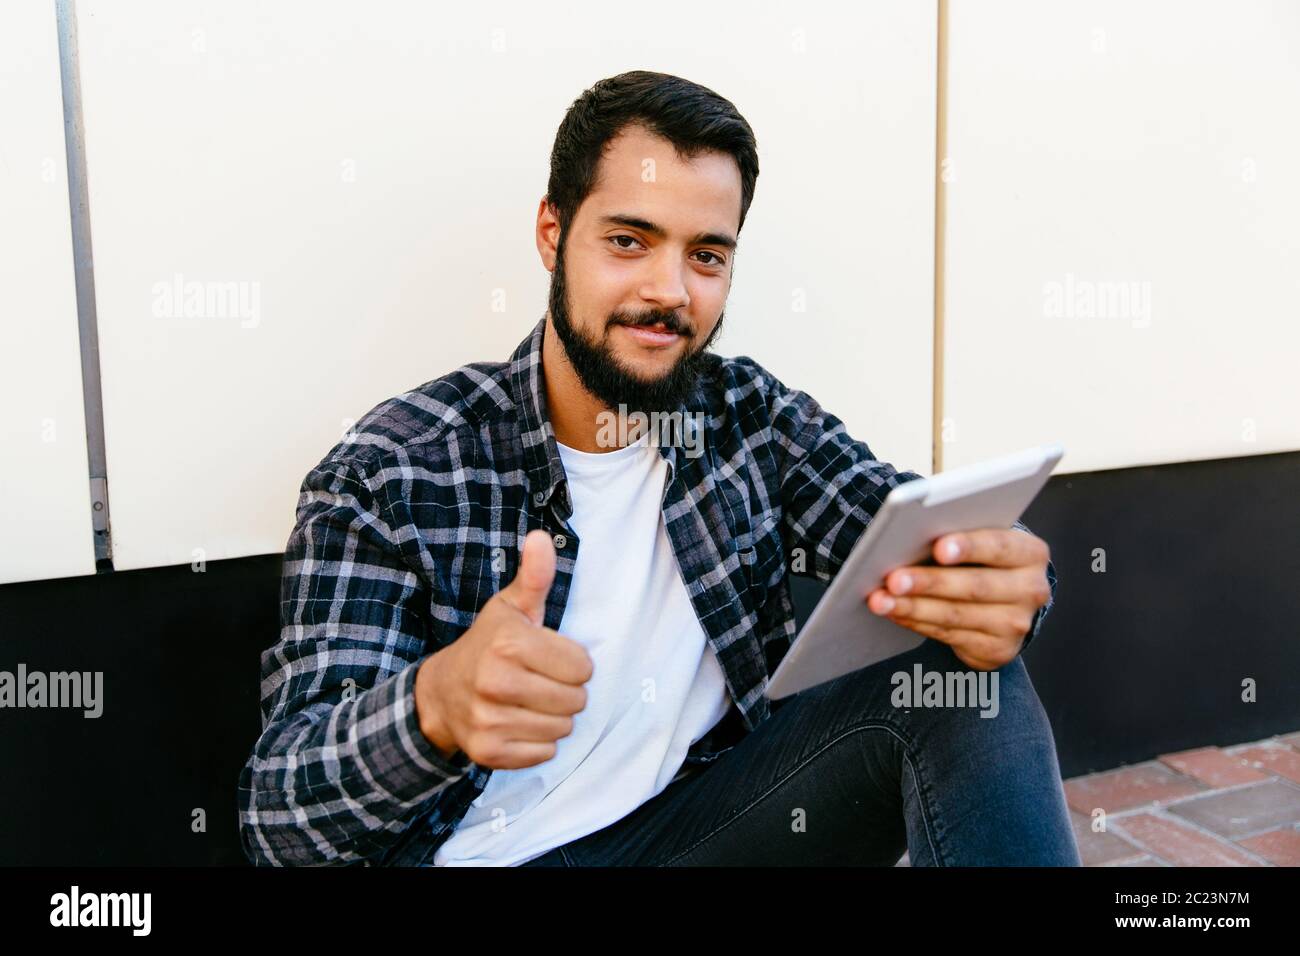 Attractive bearded man showing a thumb up, looking at camera while holding a digital tablet and sitting near the urban wall, outdoors. Stock Photo